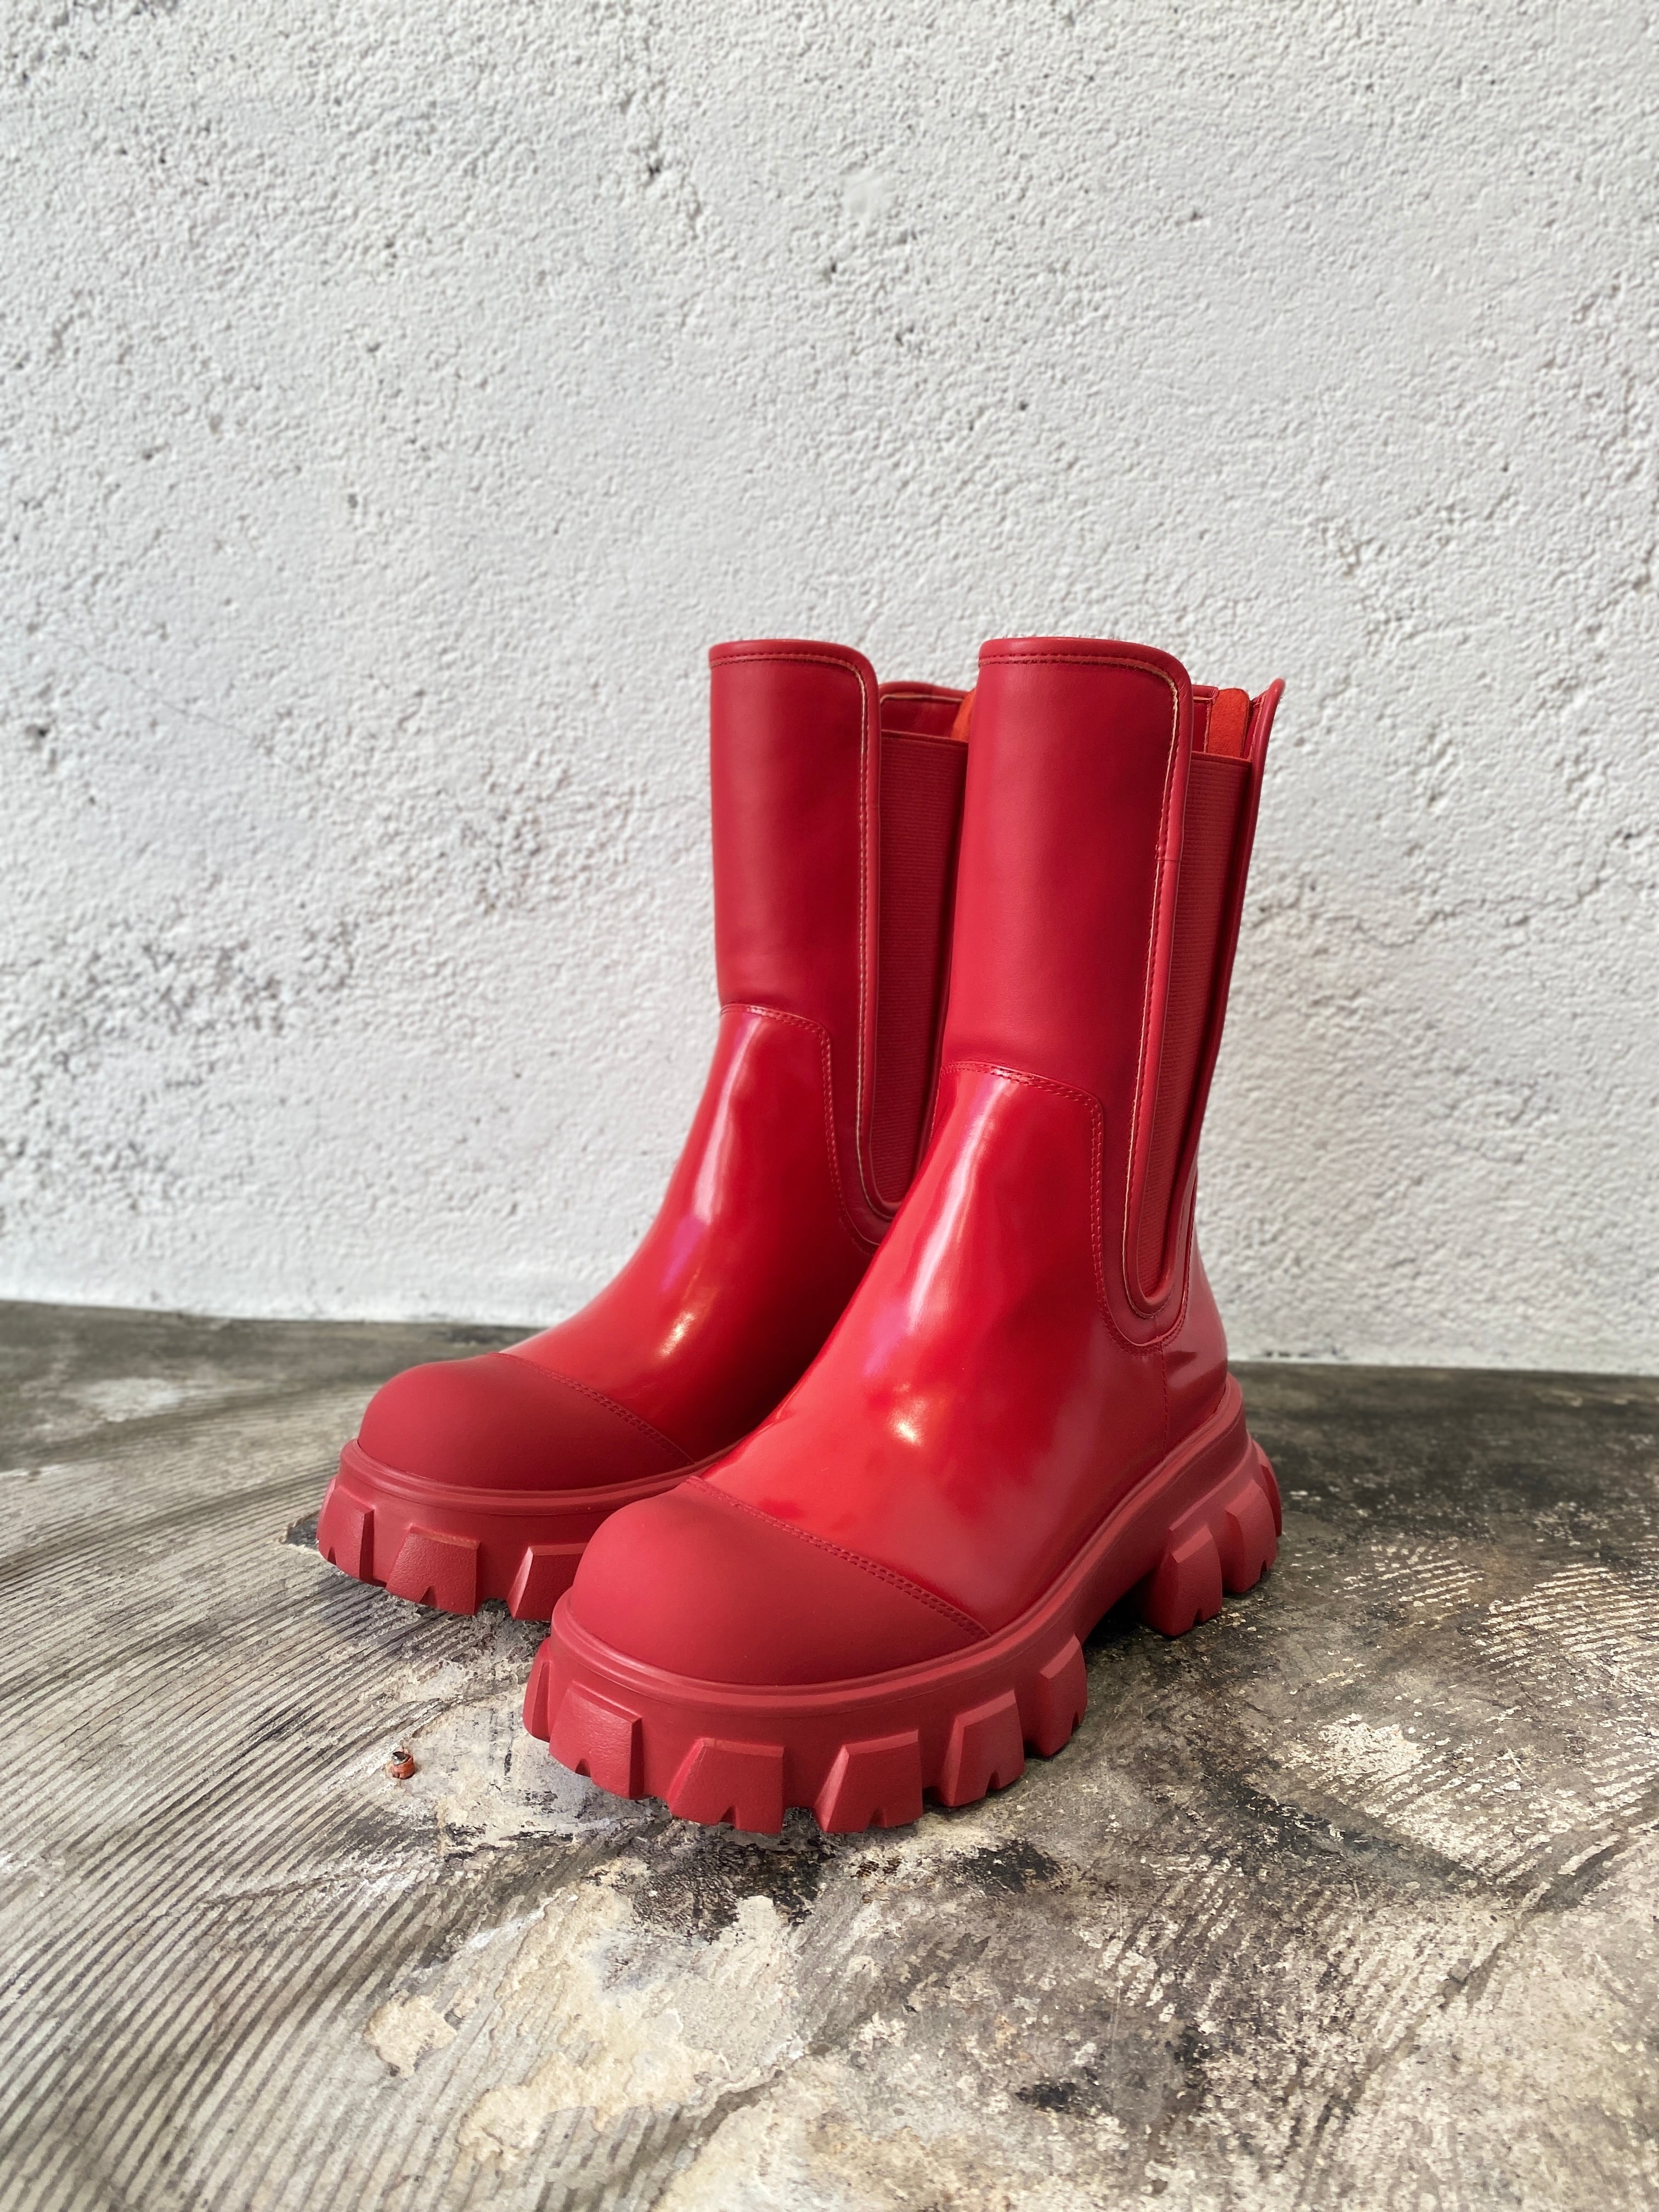 VIVIANO x lost in echo / Sidegore Boots / Red | ふぁいん